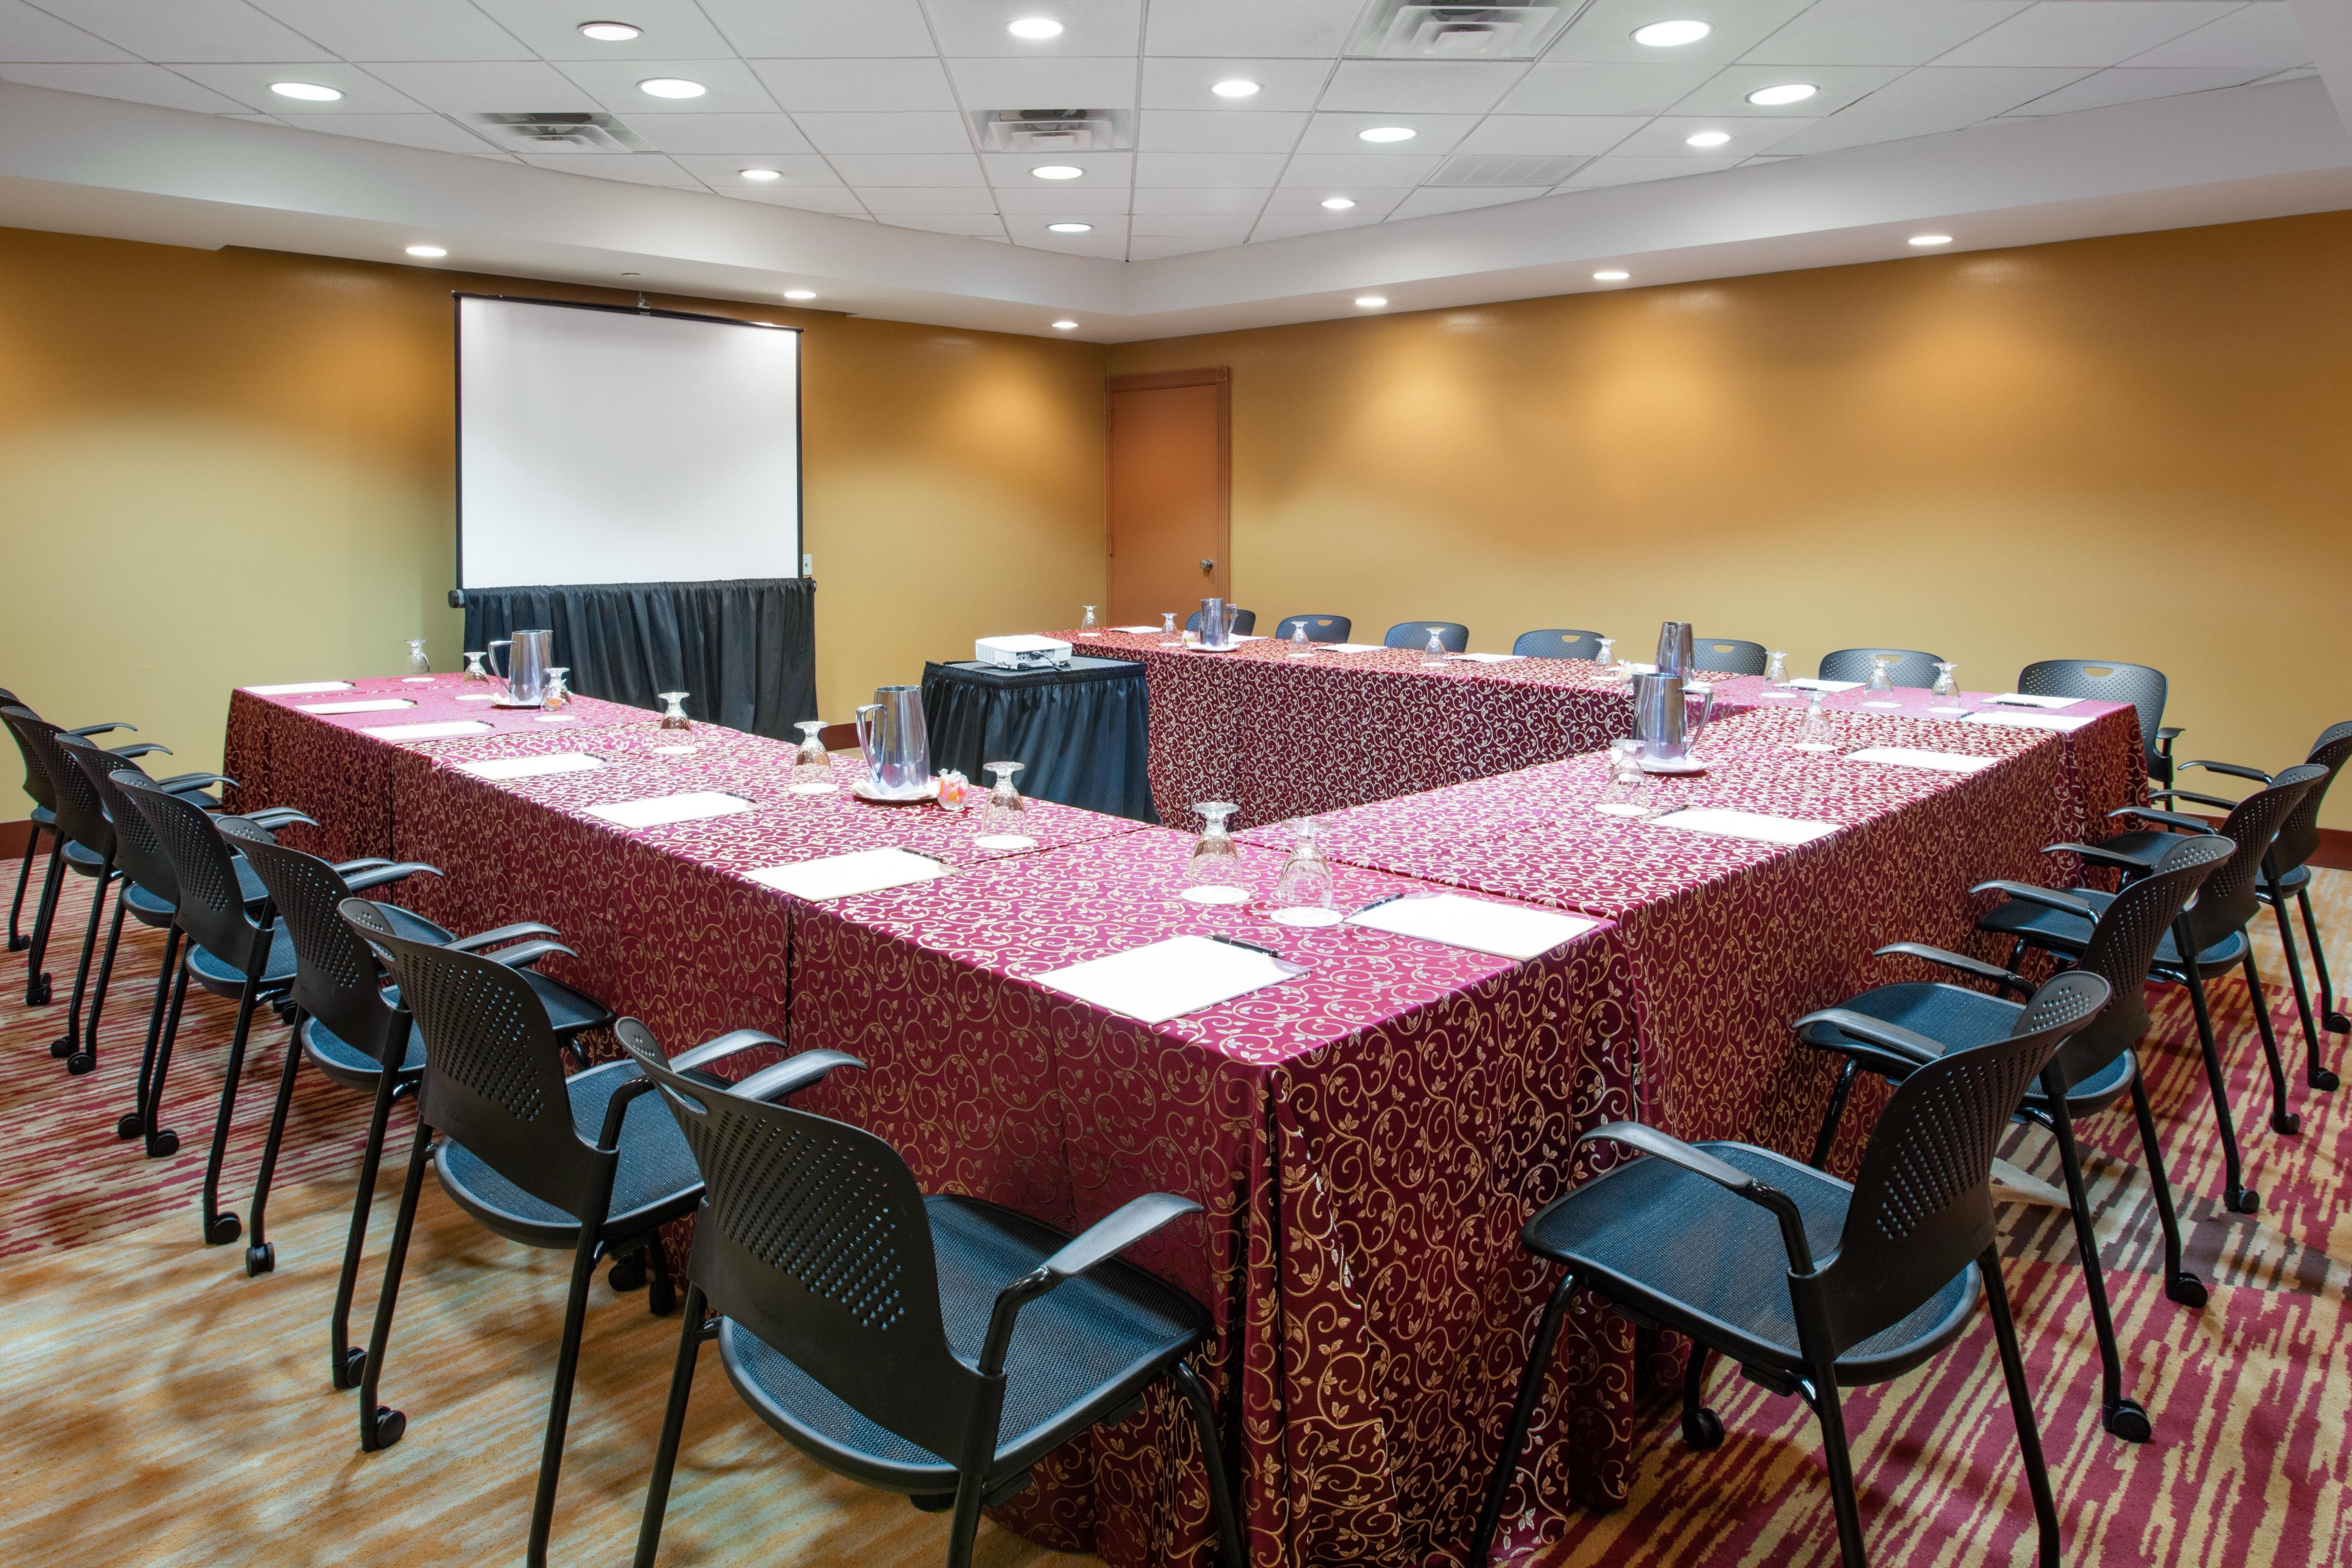 The Canterbury Room is great for smaller meetings.